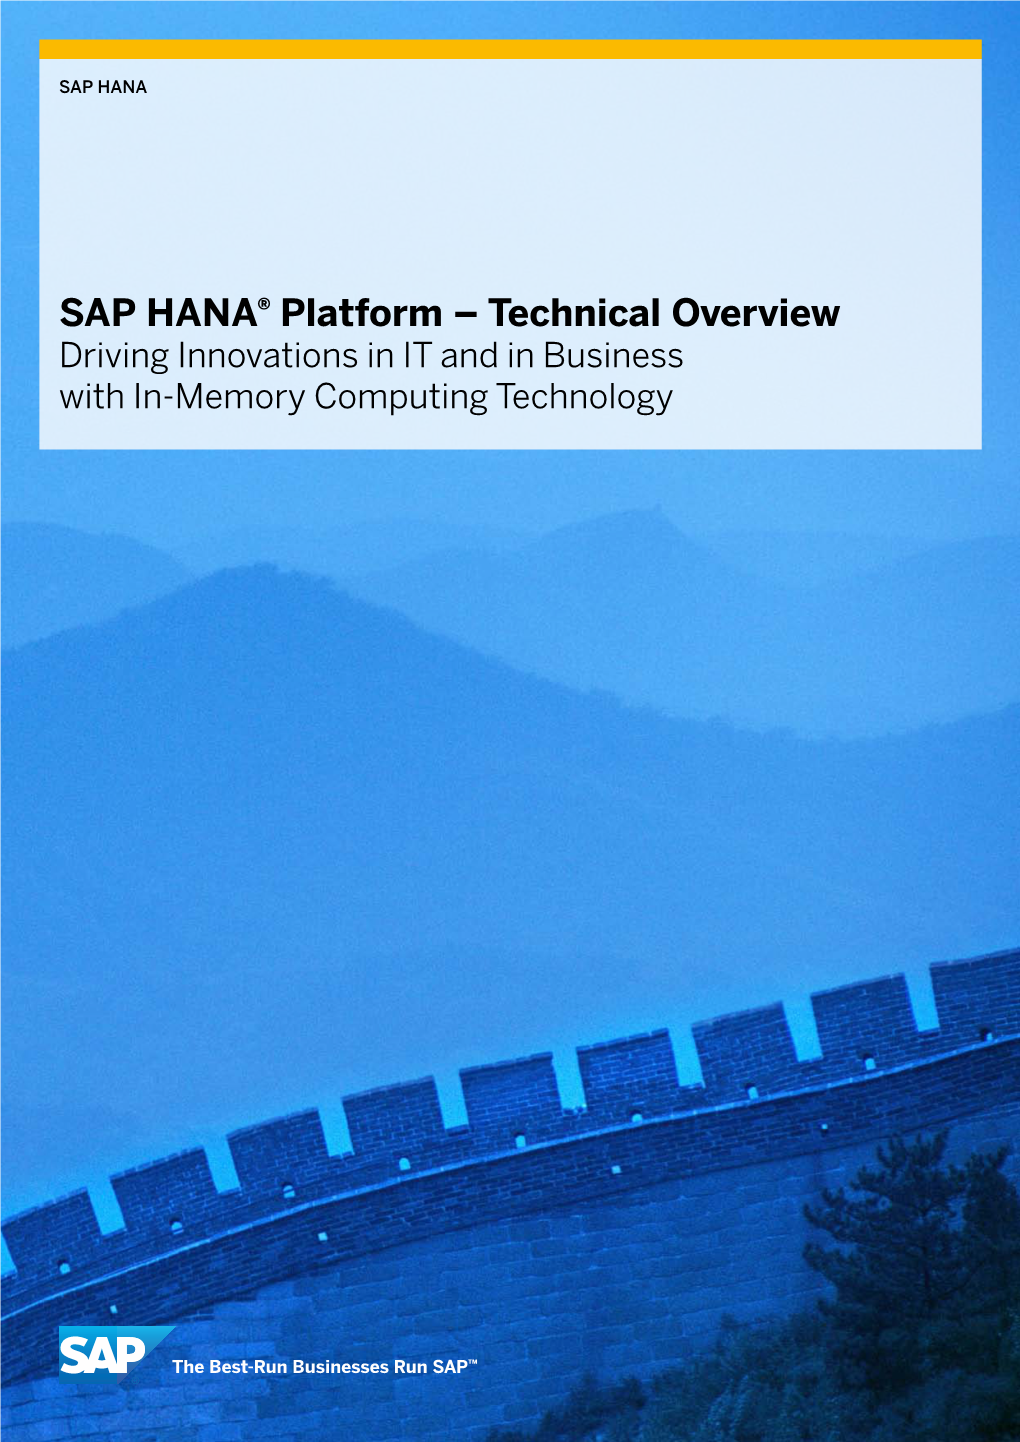 SAP HANA® Platform – Technical Overview Driving Innovations in IT and in Business with In-Memory Computing Technology